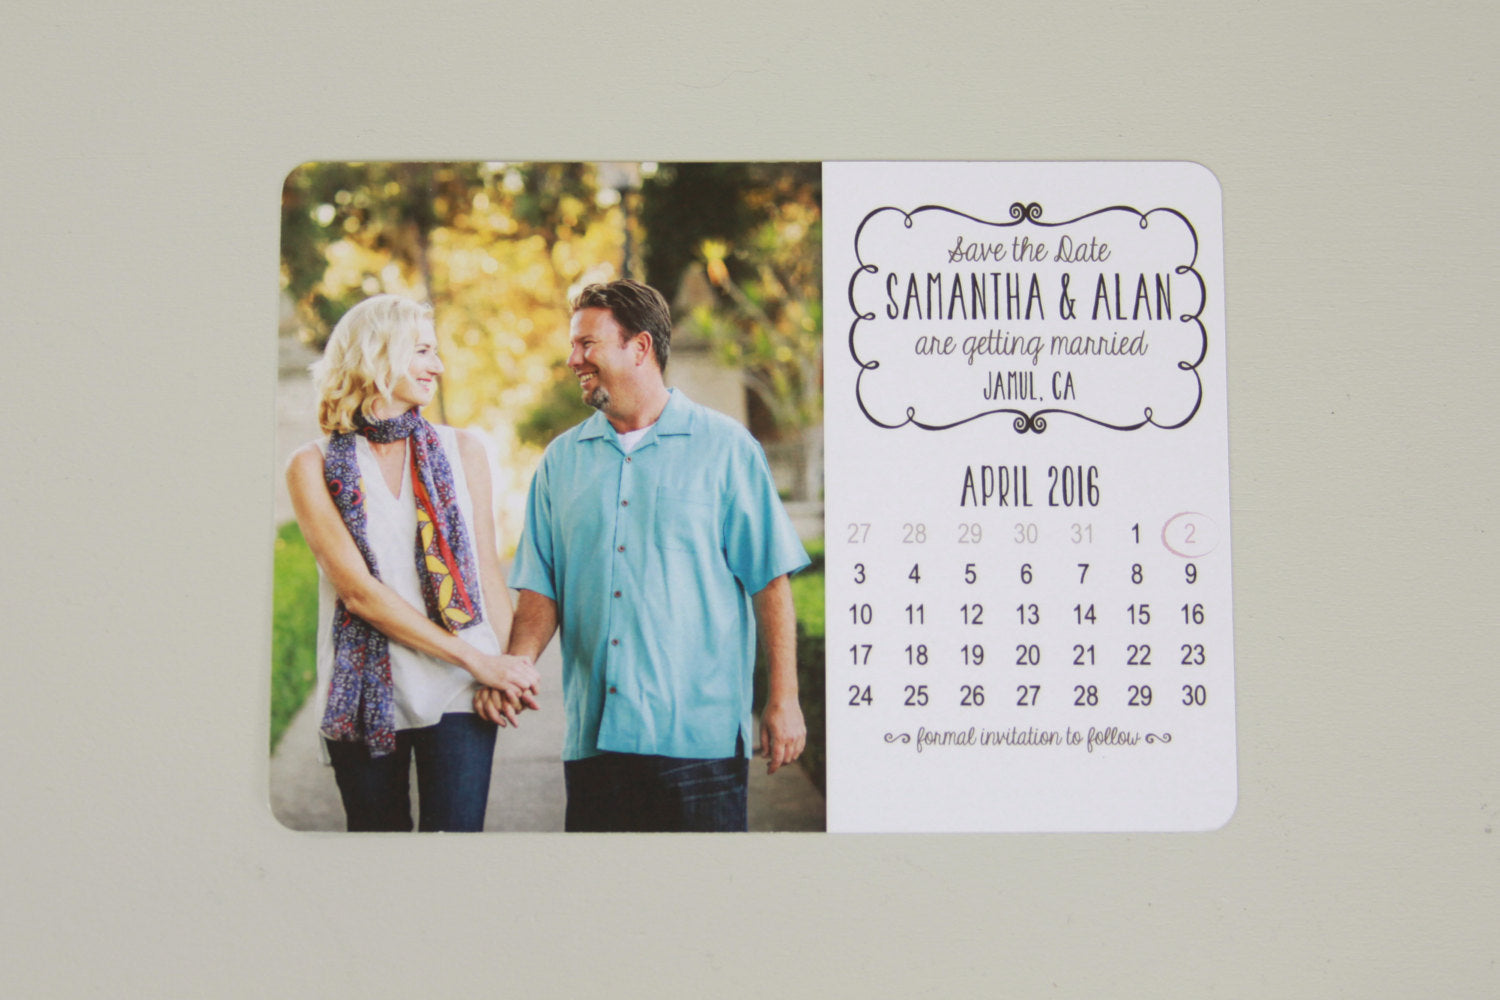 Photo Calendar Save the Date Postcard with Calendar // Wedding Save the Date Postcard Announcement